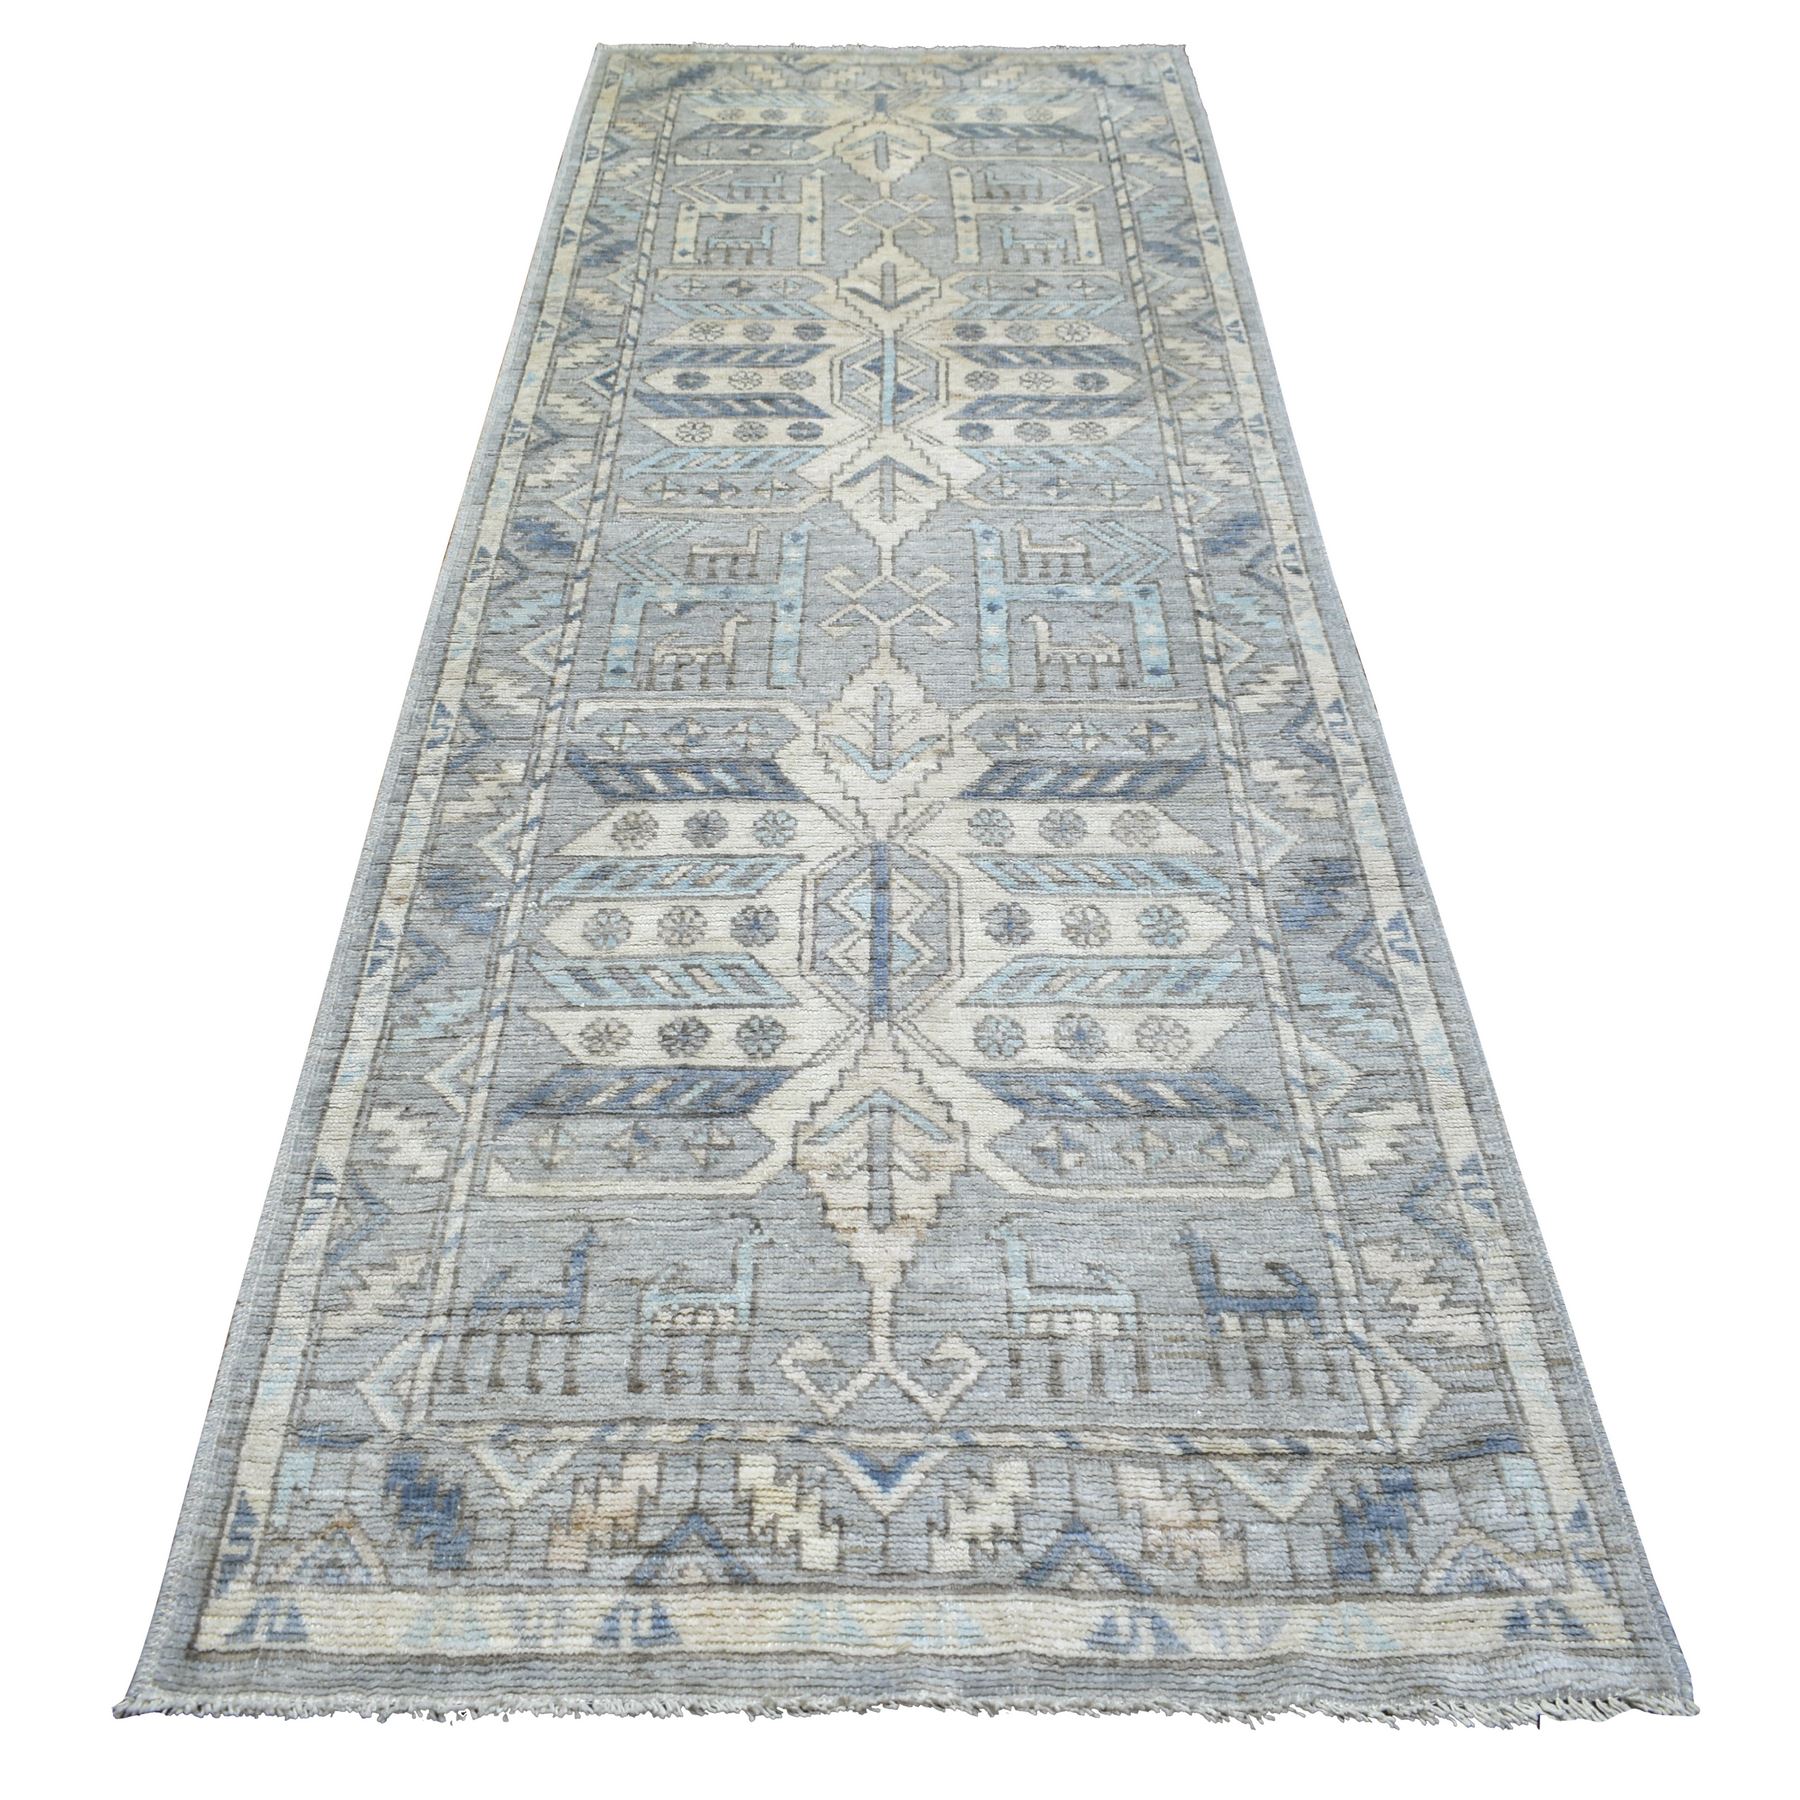 4'x10' Light Blue, Soft Wool Hand Woven, Anatolian Village Inspired Geometric Medallion Design with Animal Figurines Natural Dyes, Wide Runner Oriental Rug 